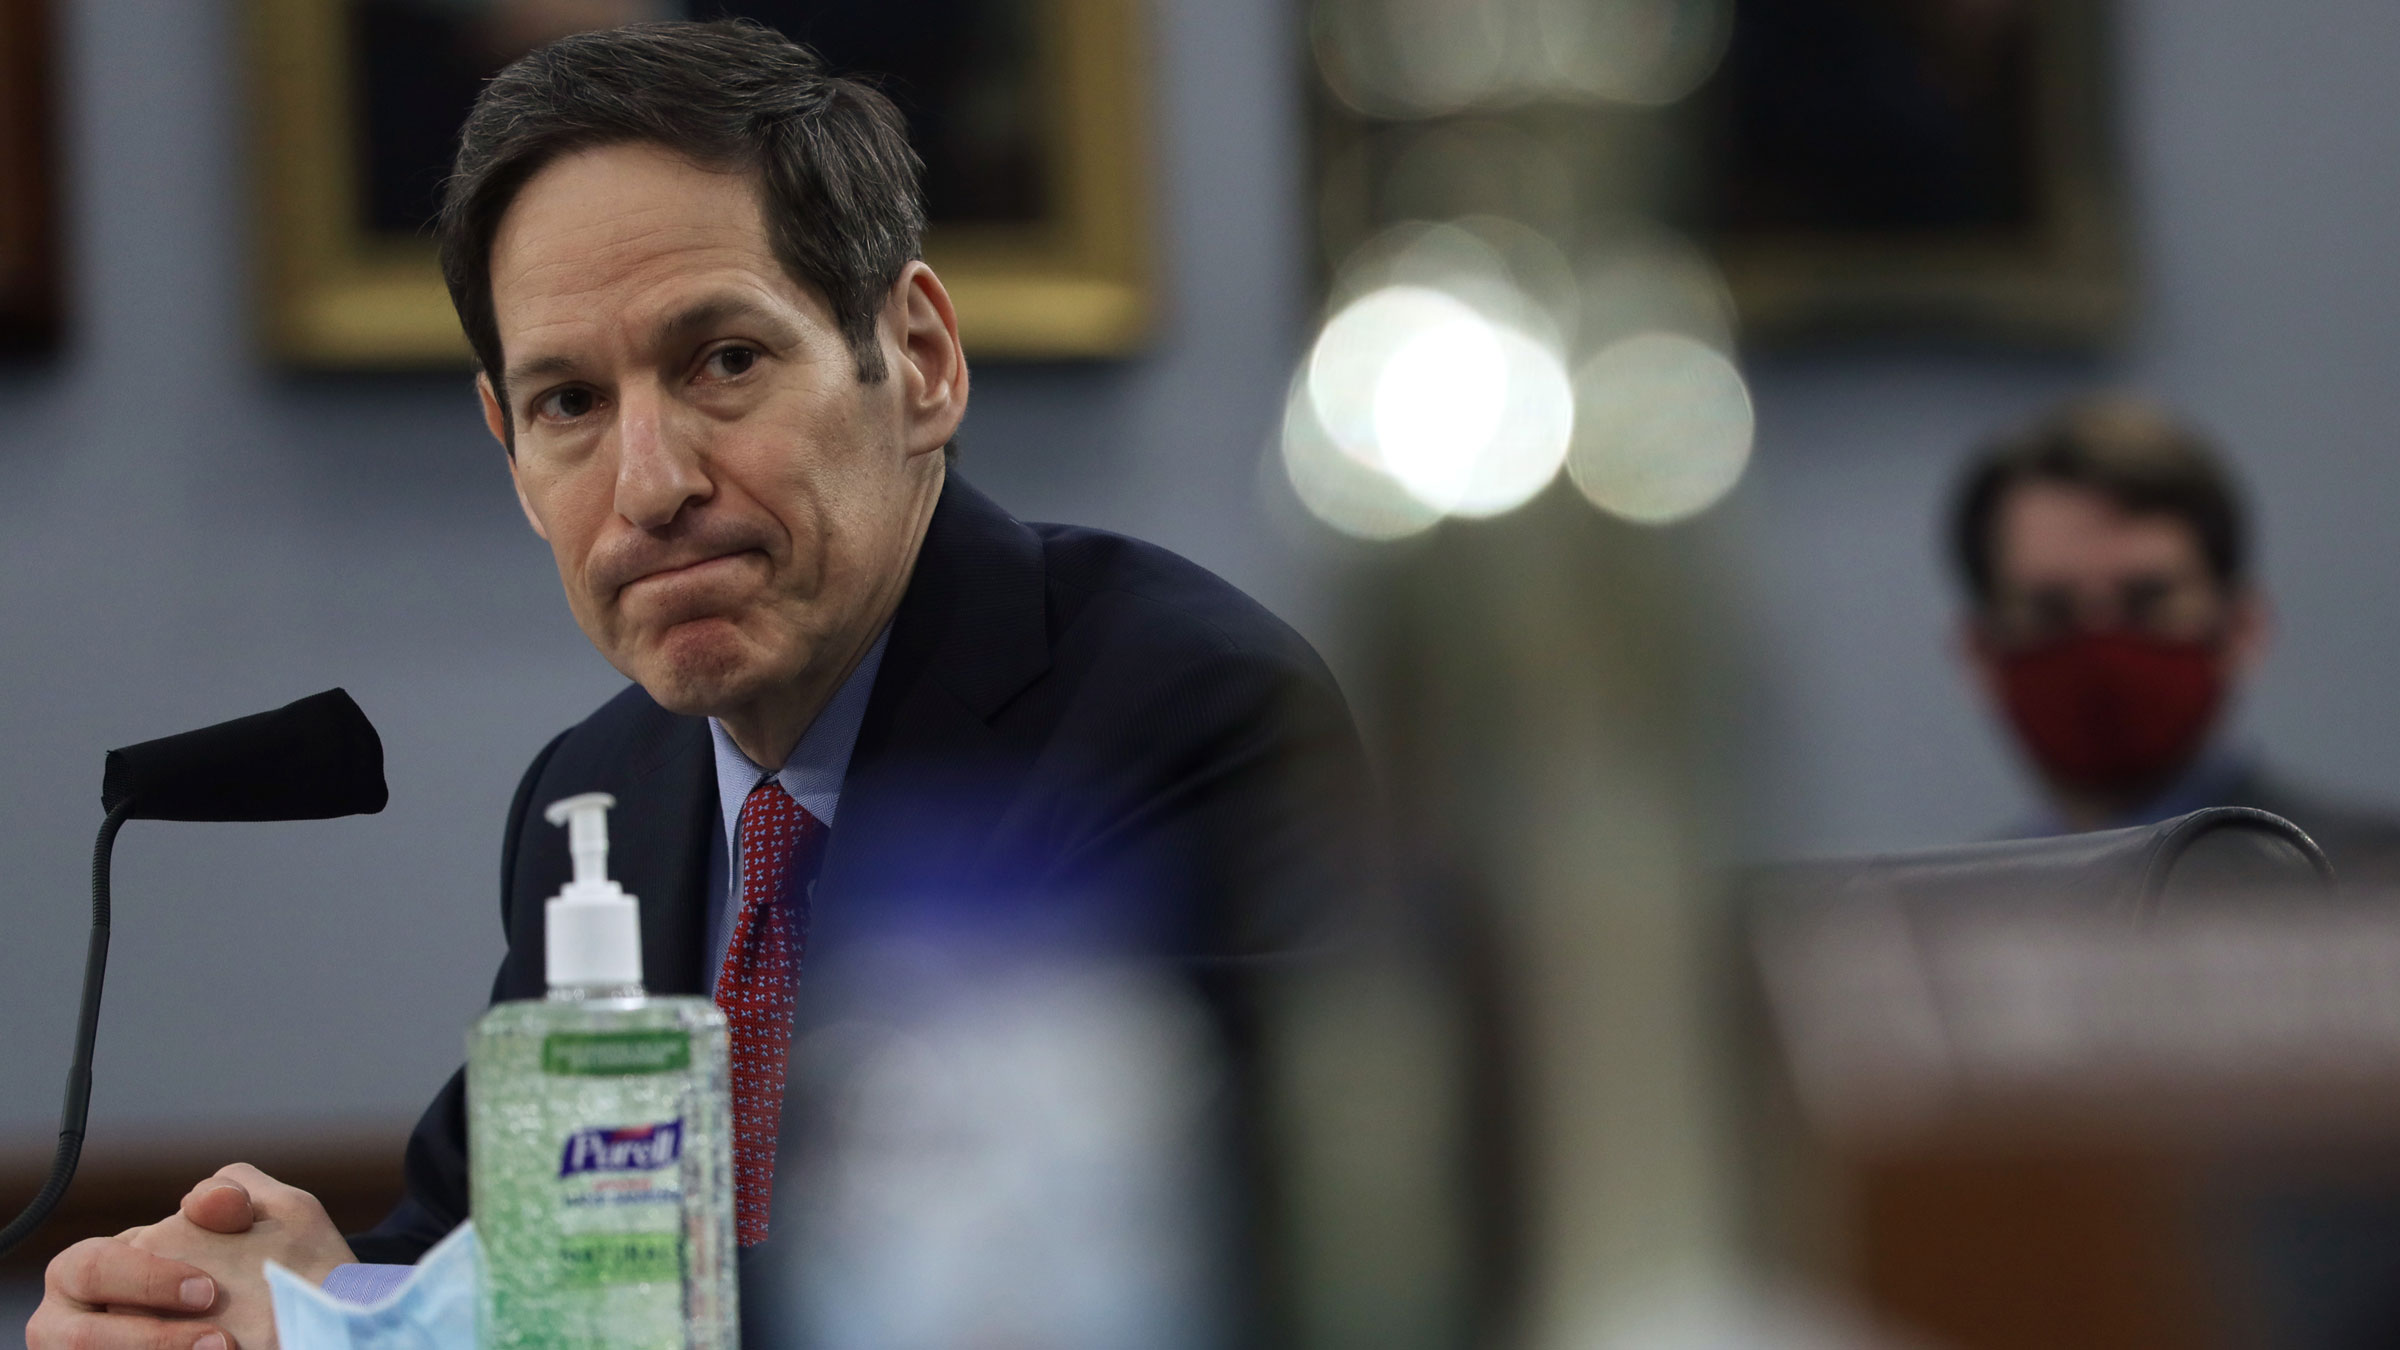 Dr. Tom Frieden, the former director of the Centers for Disease Control and Prevention, testifies before a House subcommittee in May.